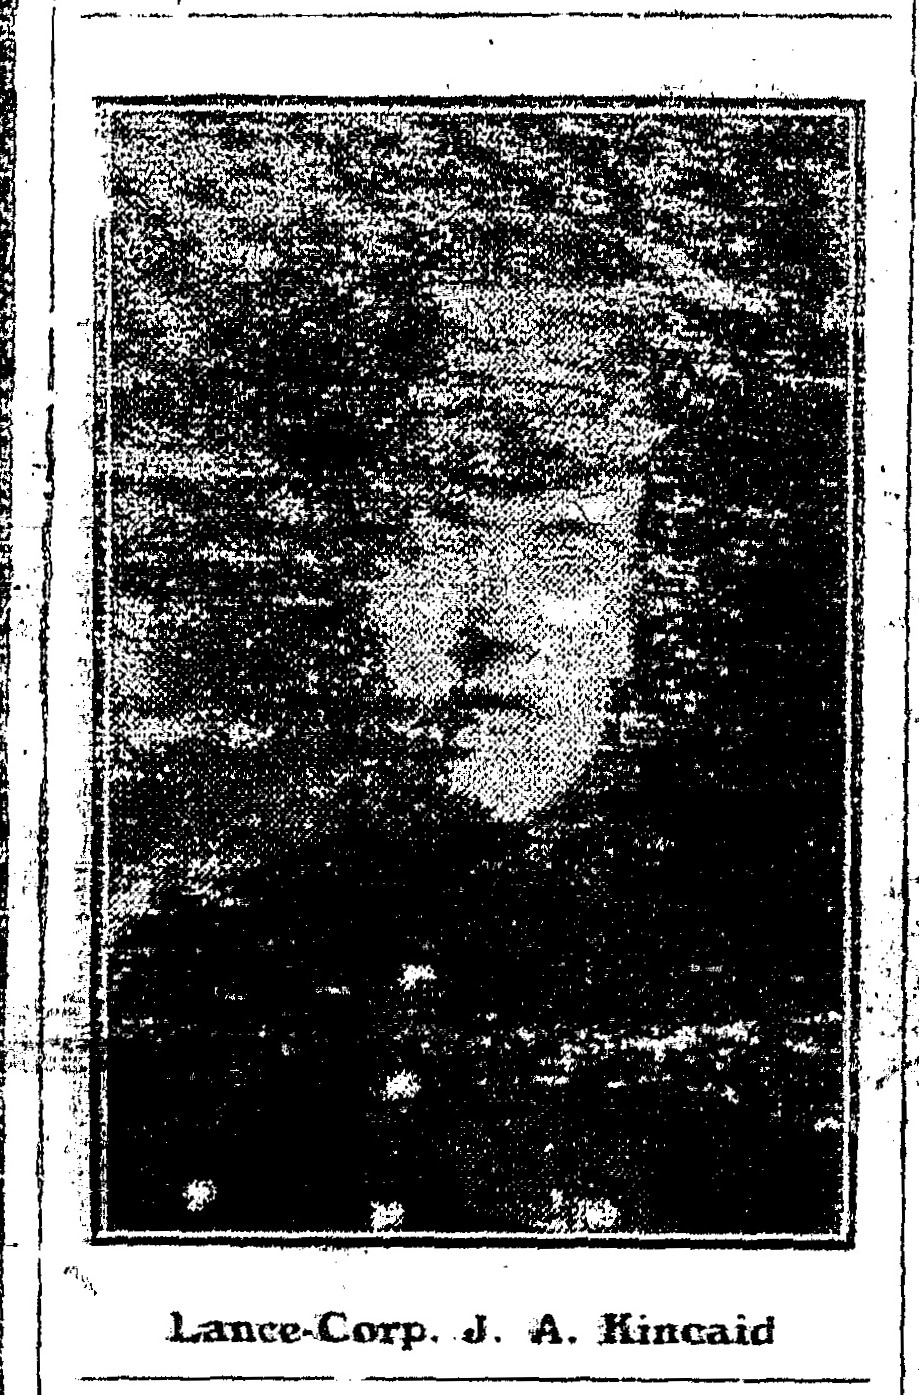 The Chesley Enterprise, October 10, 1918